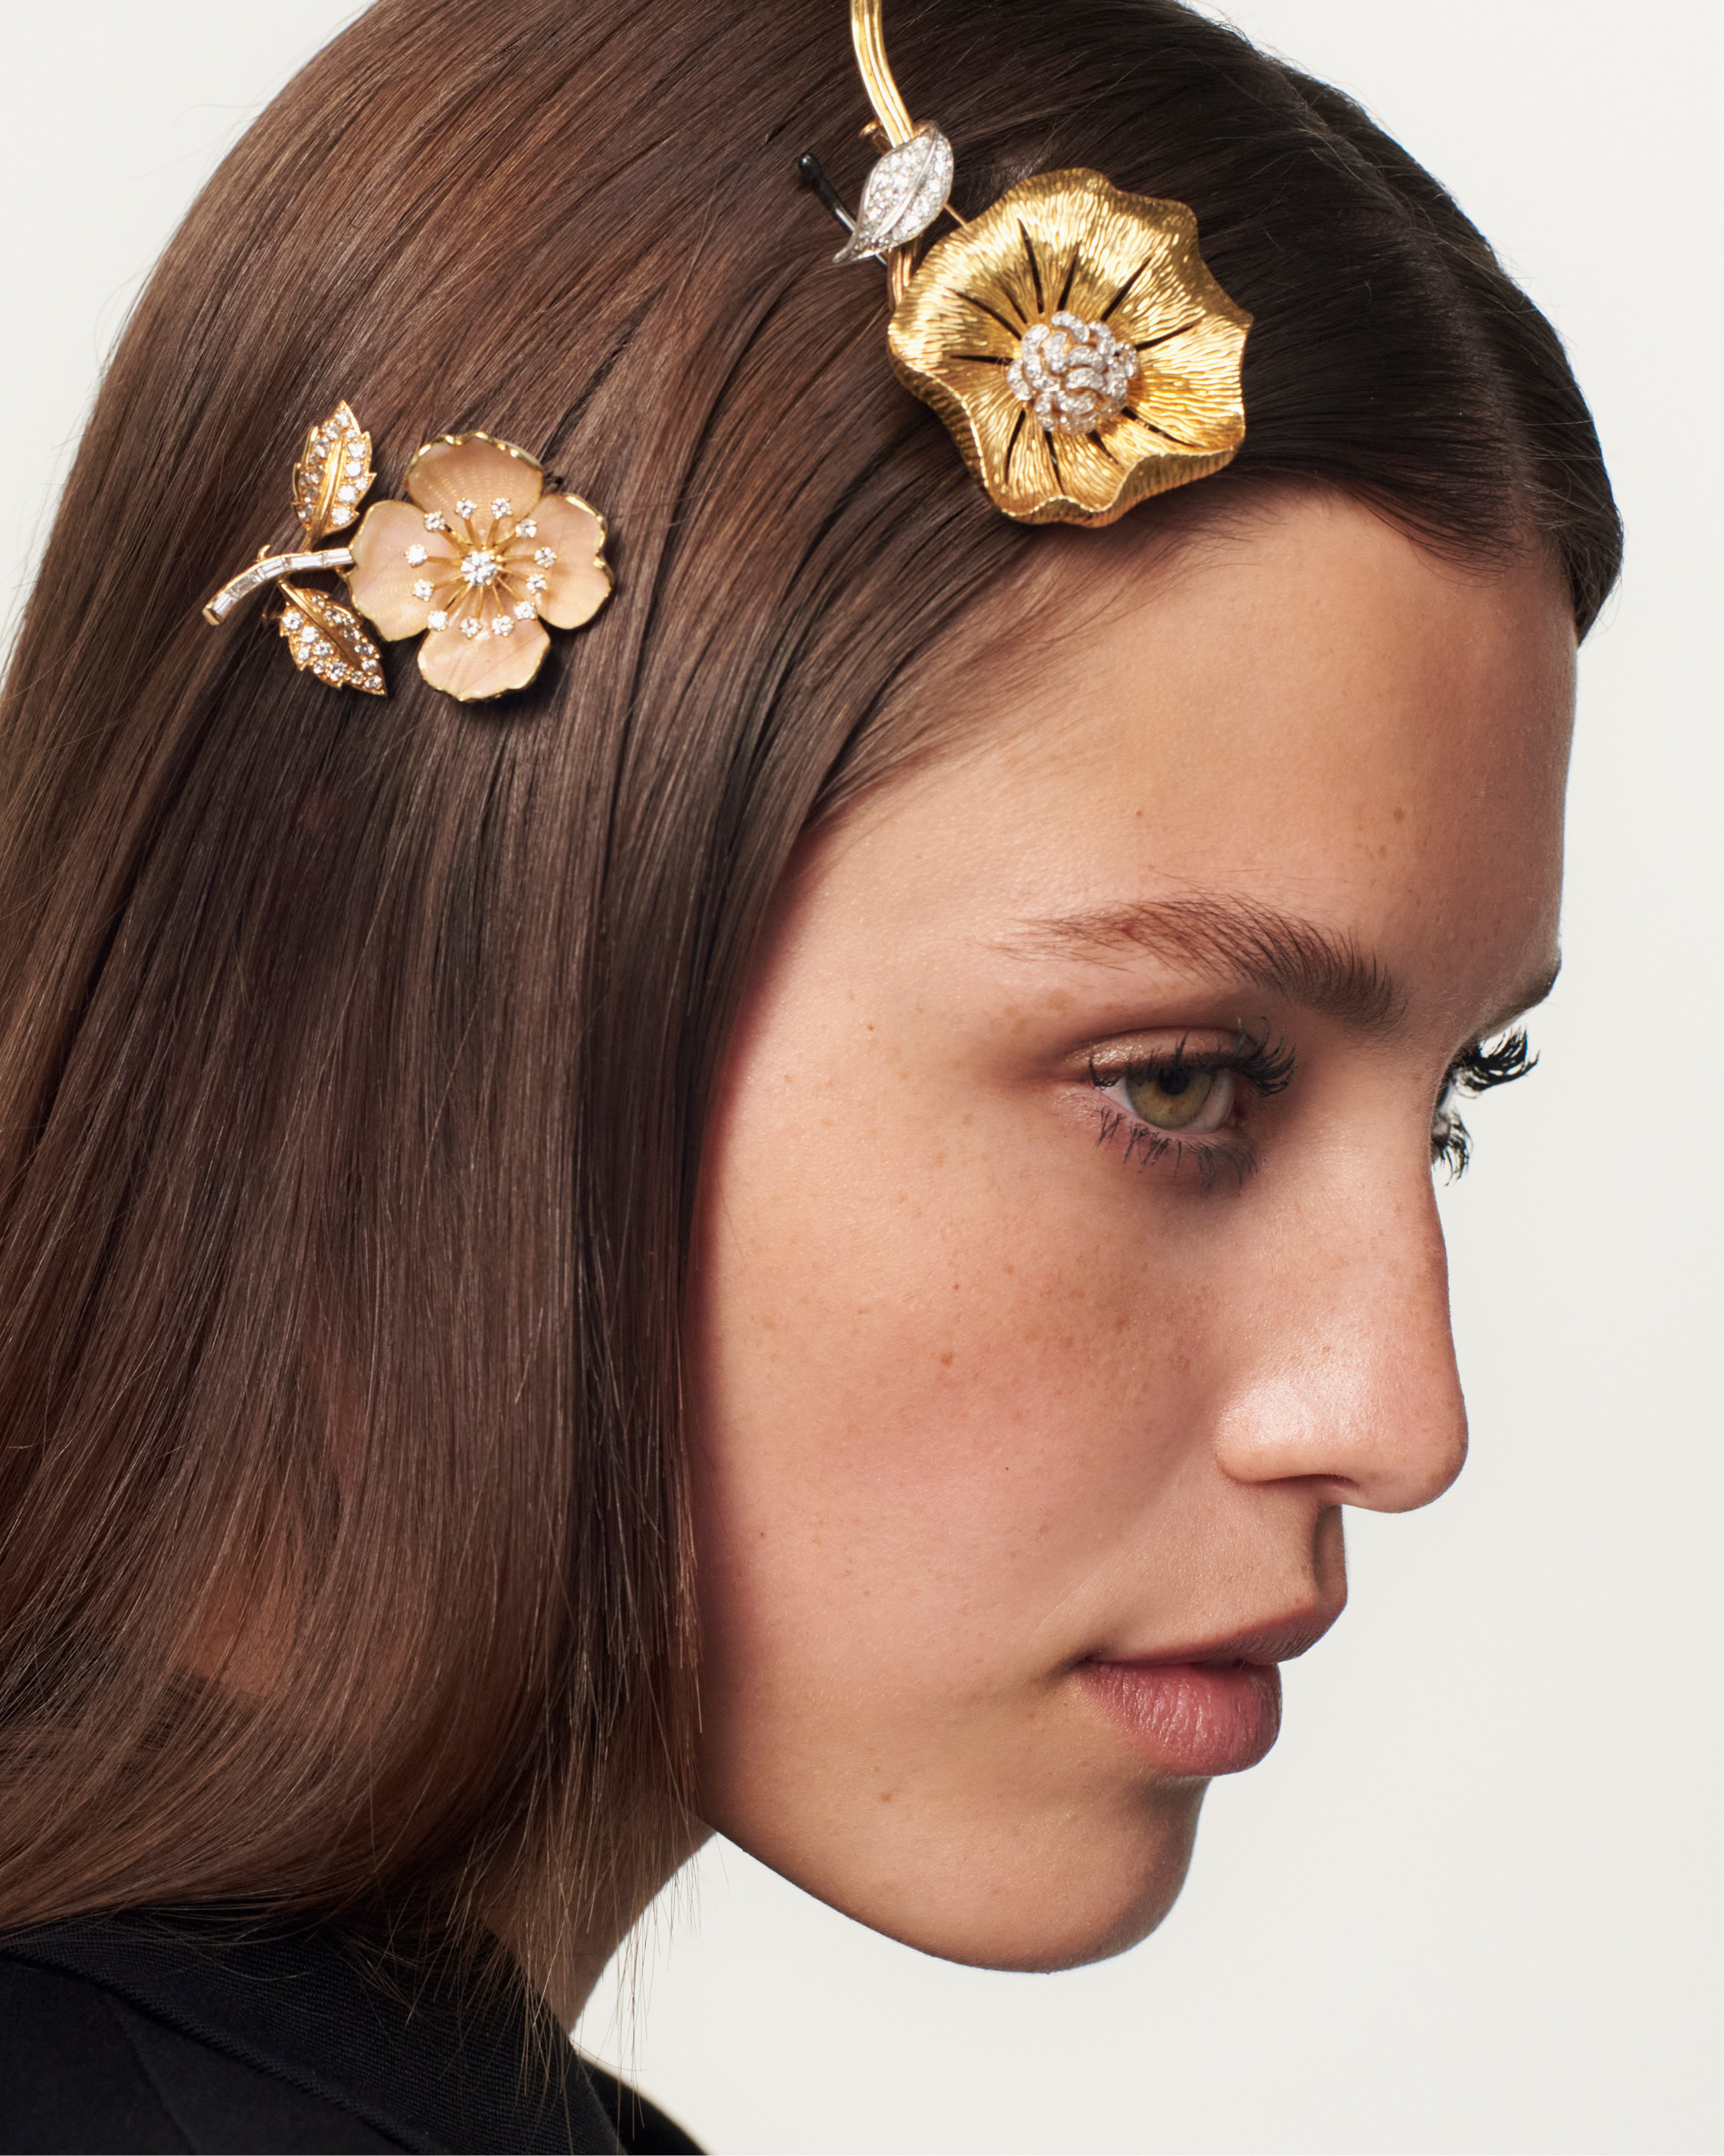 These flower clips date from the 1950s when they were worn on jacket lapels. Today, 70 years on, they are being repurposed as hair jewellery, part of widening trend. Photo: Boucheron